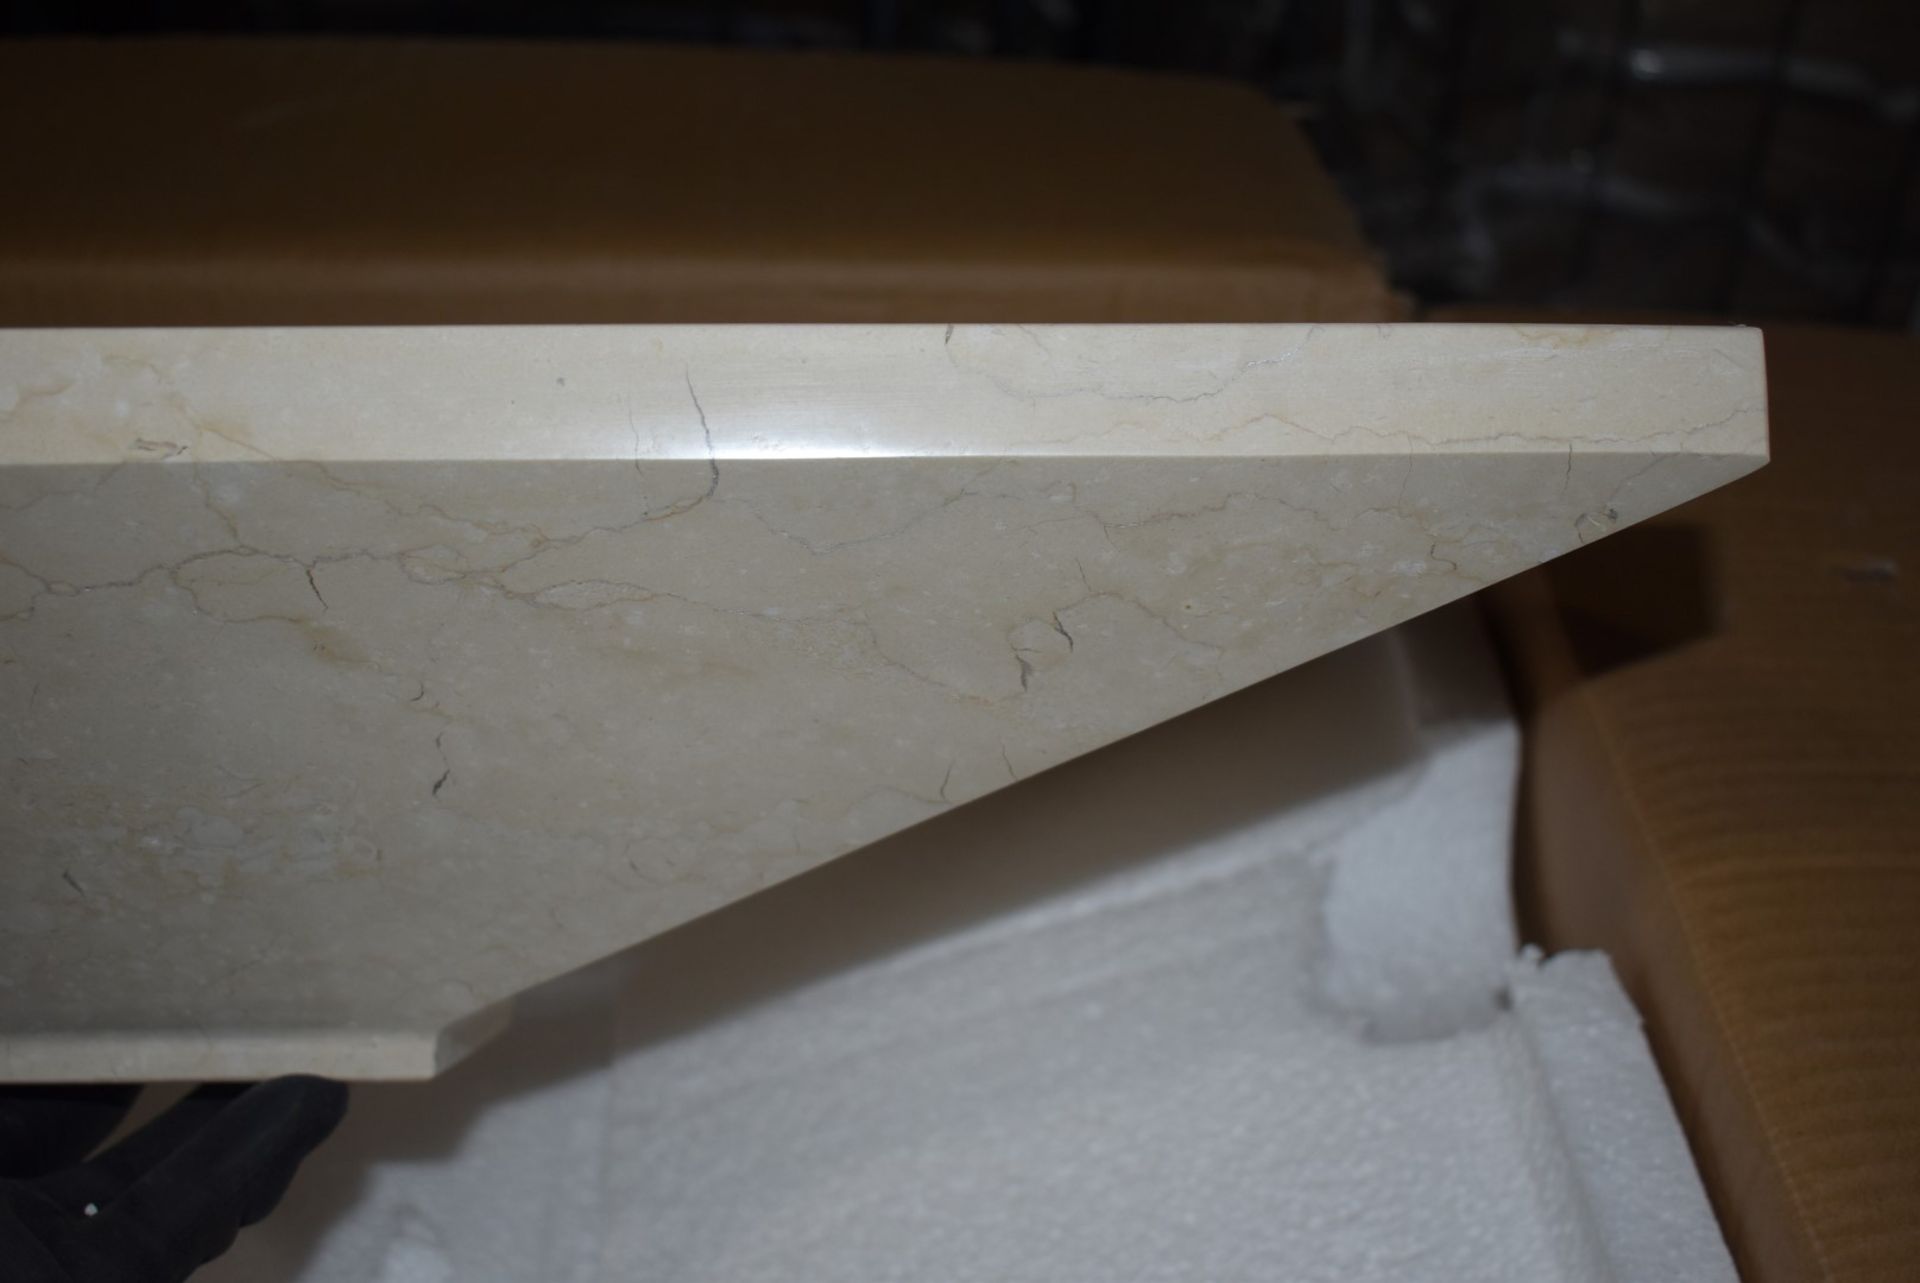 1 x Stonearth 'Karo' Solid Galala Marble Stone Countertop Sink Basin - New Boxed Stock - RRP £ - Image 6 of 8